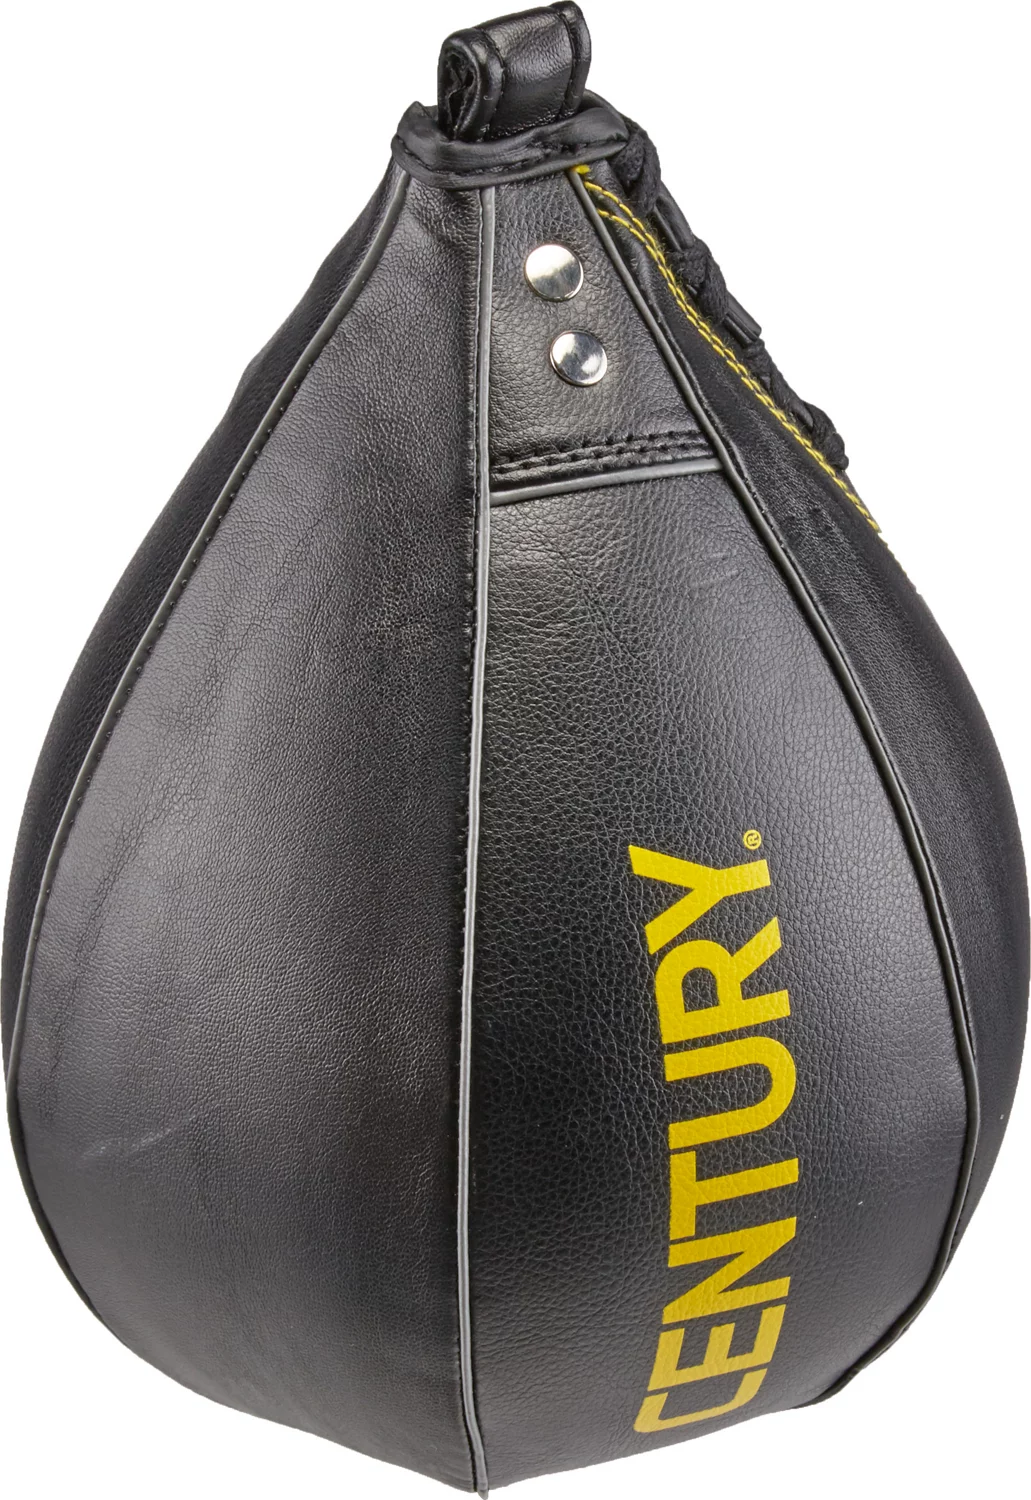 Boxing Equipment | Punching Bags, Speed Bags, Punch Bag Stand | Academy